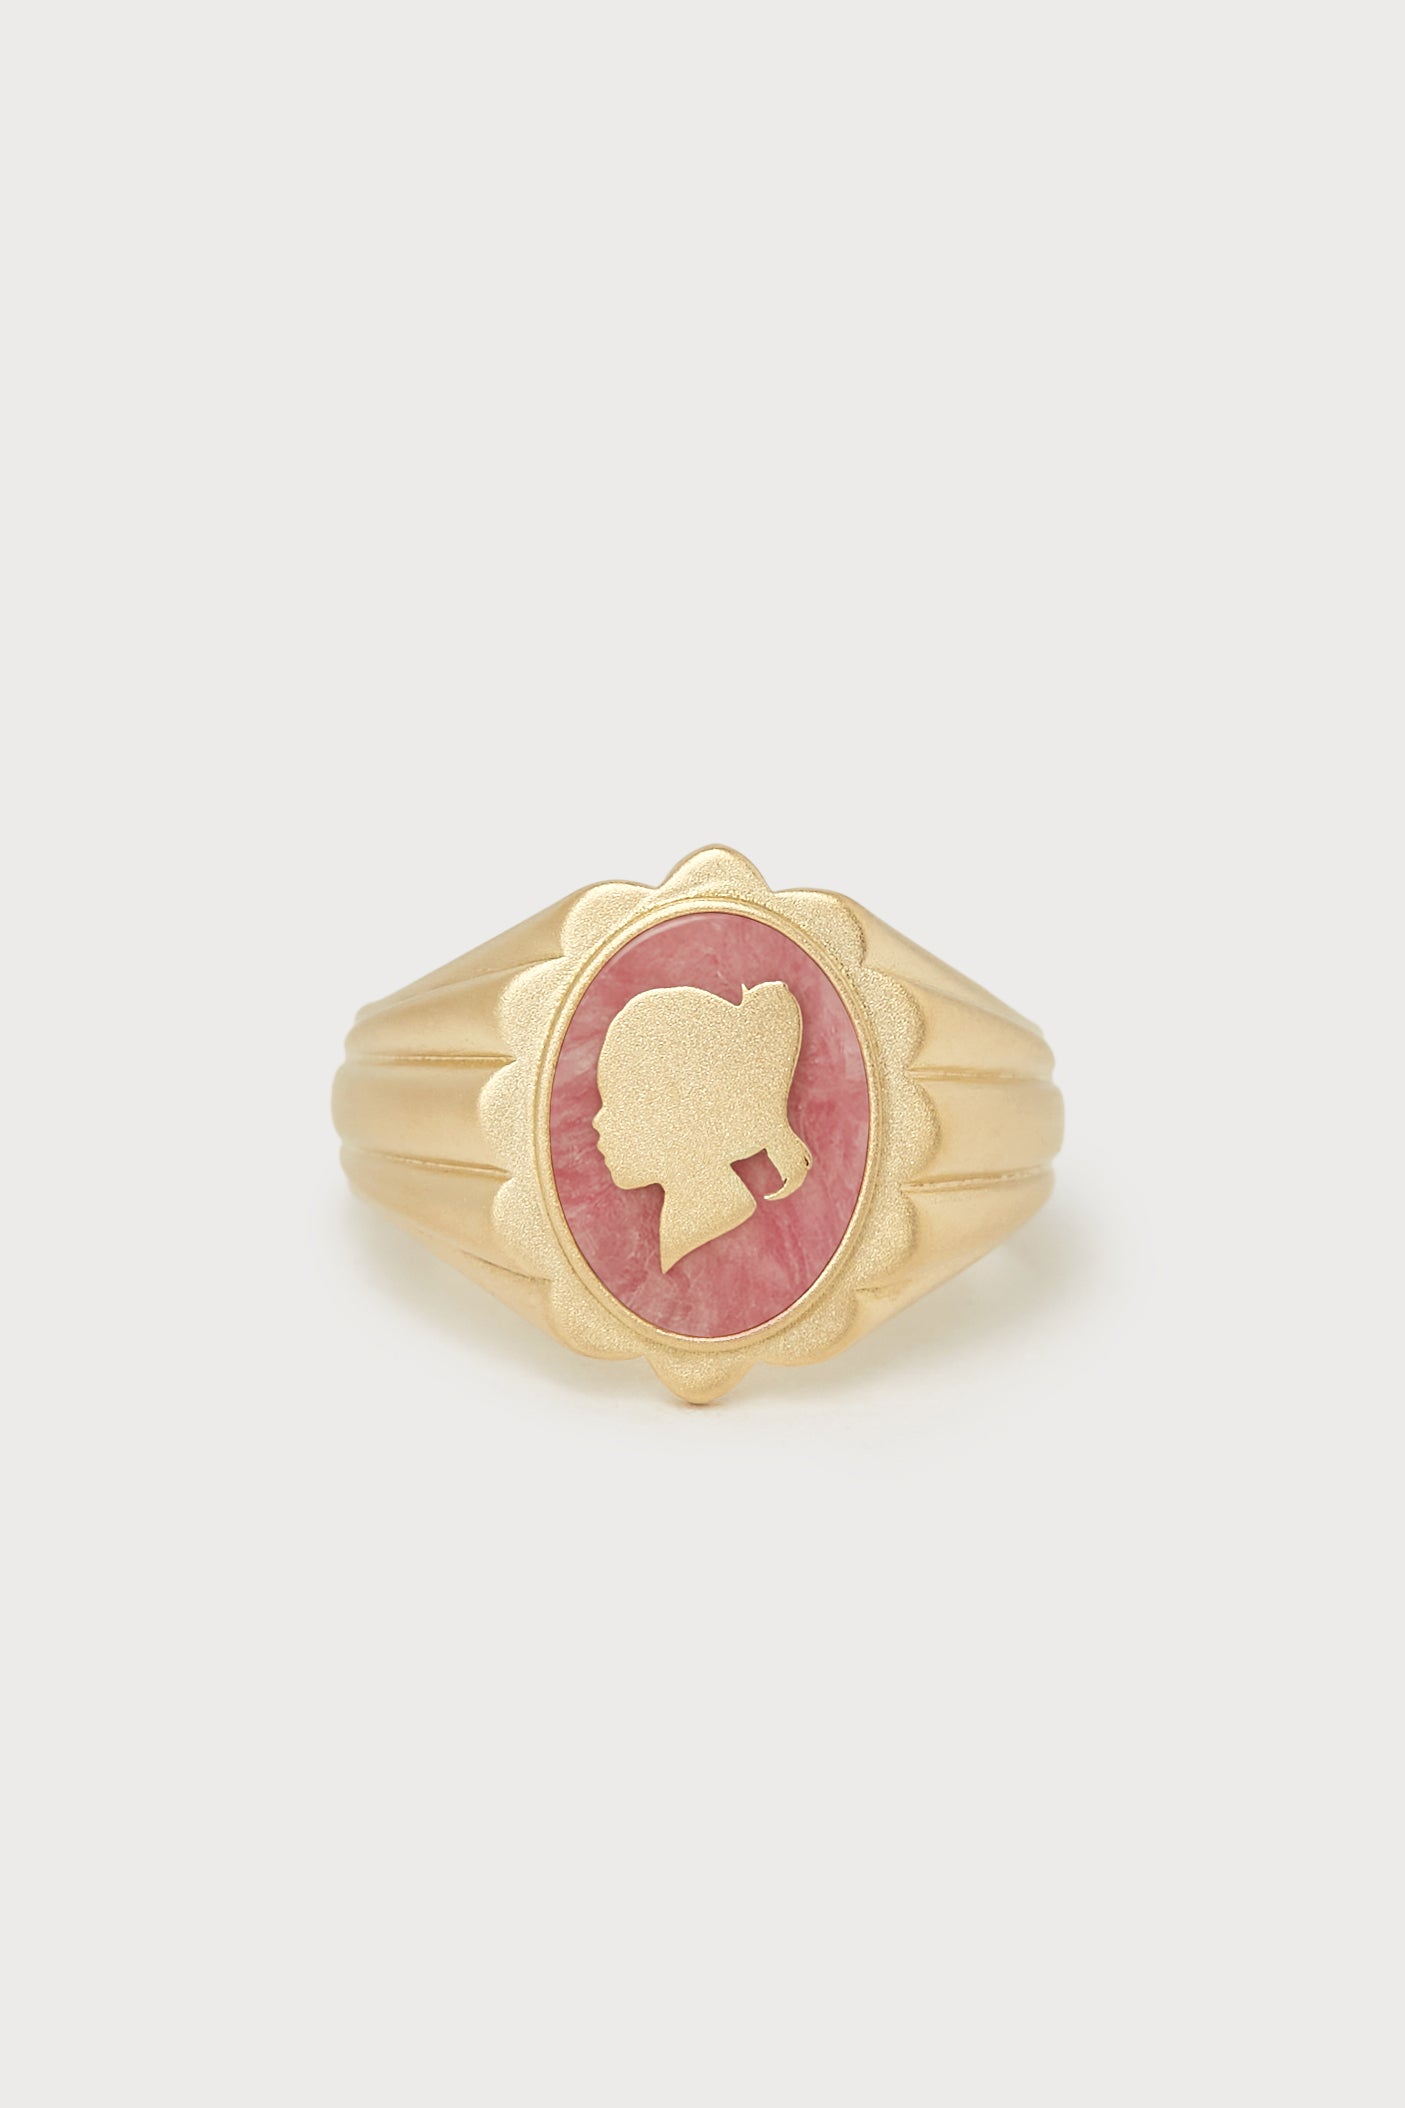 Personalized Scalloped Silhouette Ring <br> Rhodochrosite